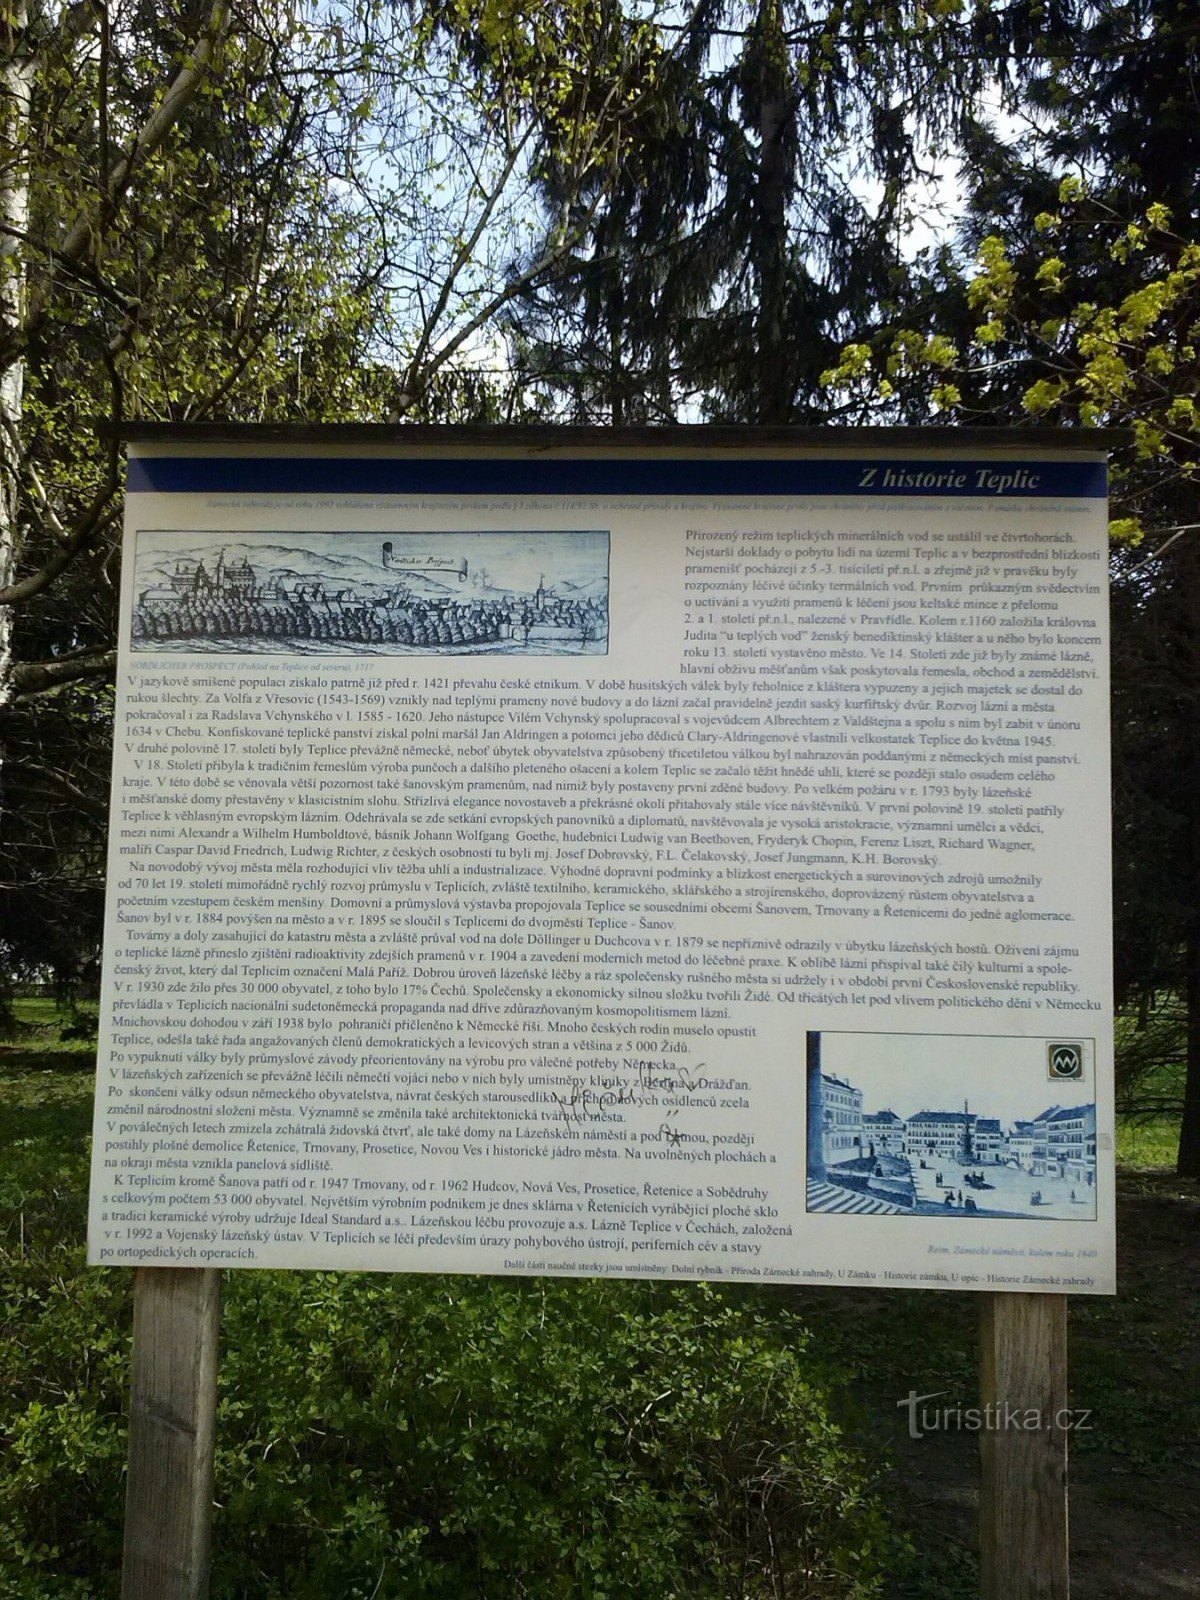 1. Lessons about the history of Teplice on the edge of the park